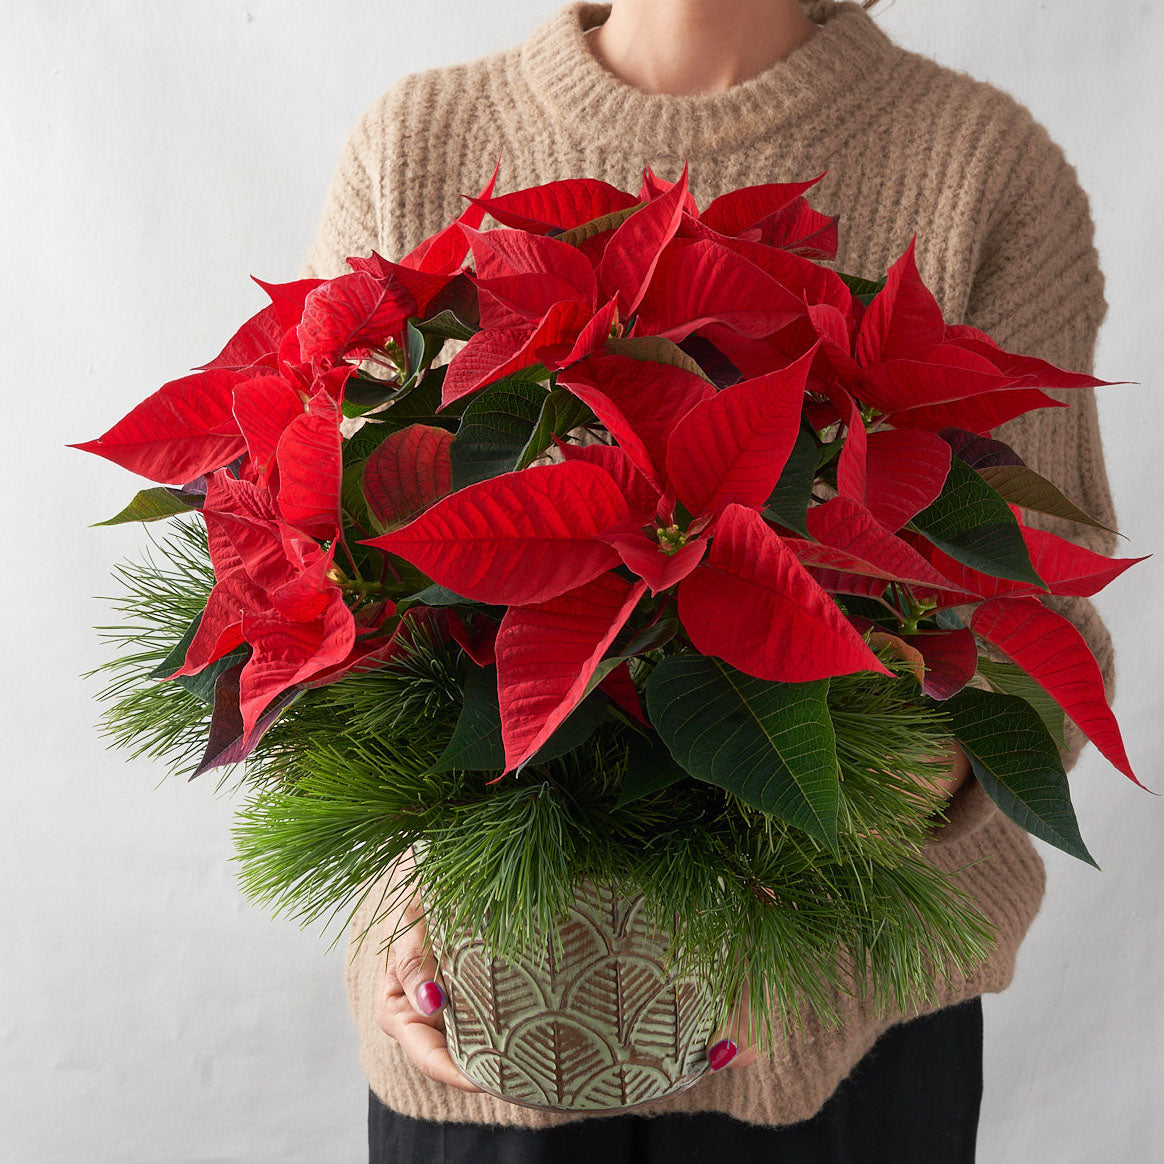 Woman holding red poinsettia in decorative pot with pine boughs.